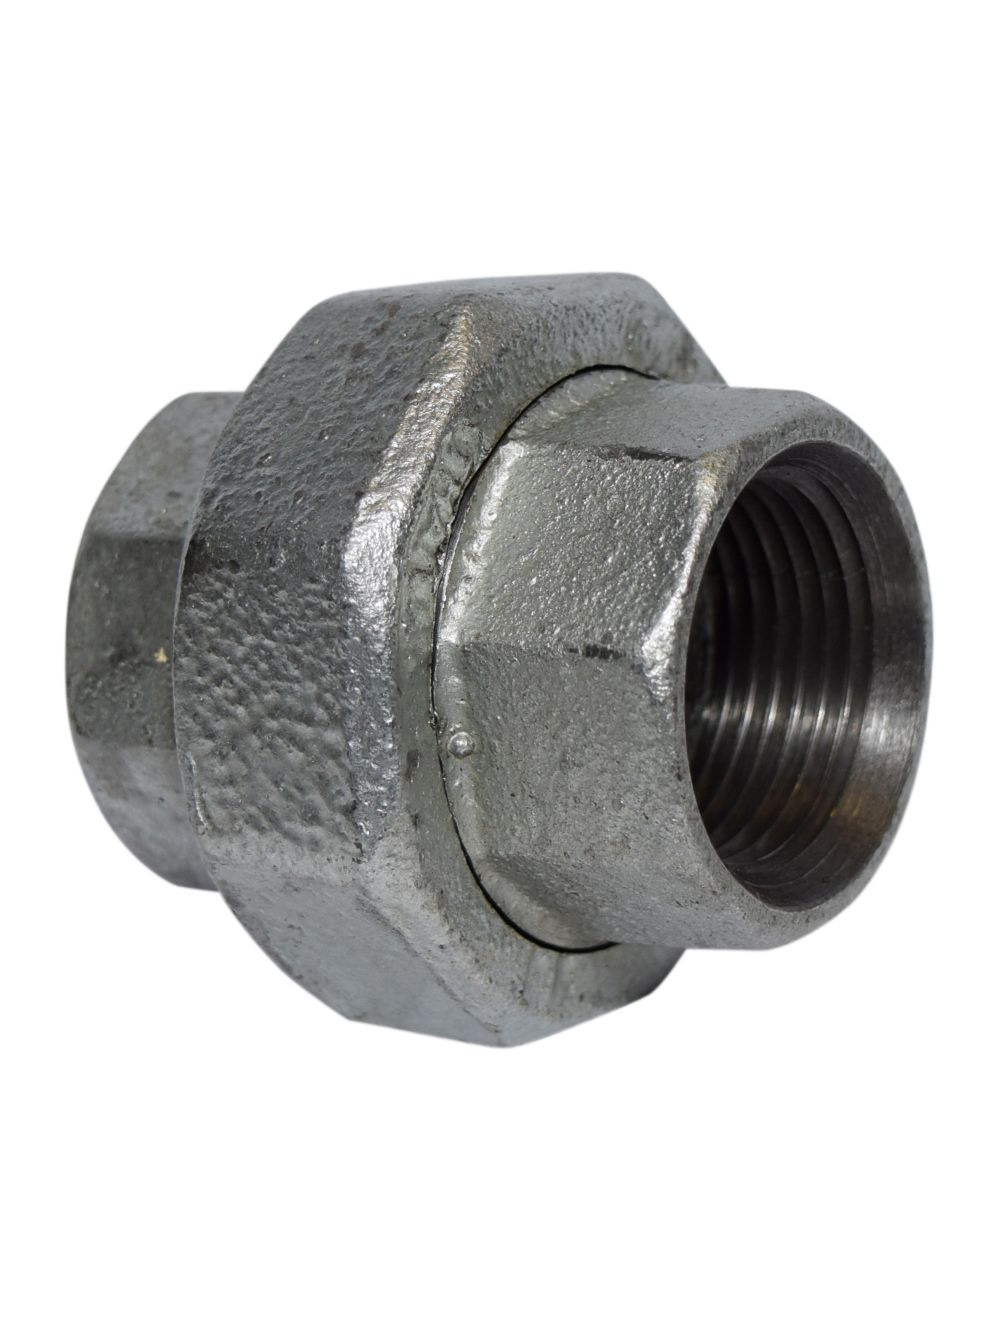 3/8" Union Male/Female Galvanised Malleable Iron Pipe Fitting BSP 